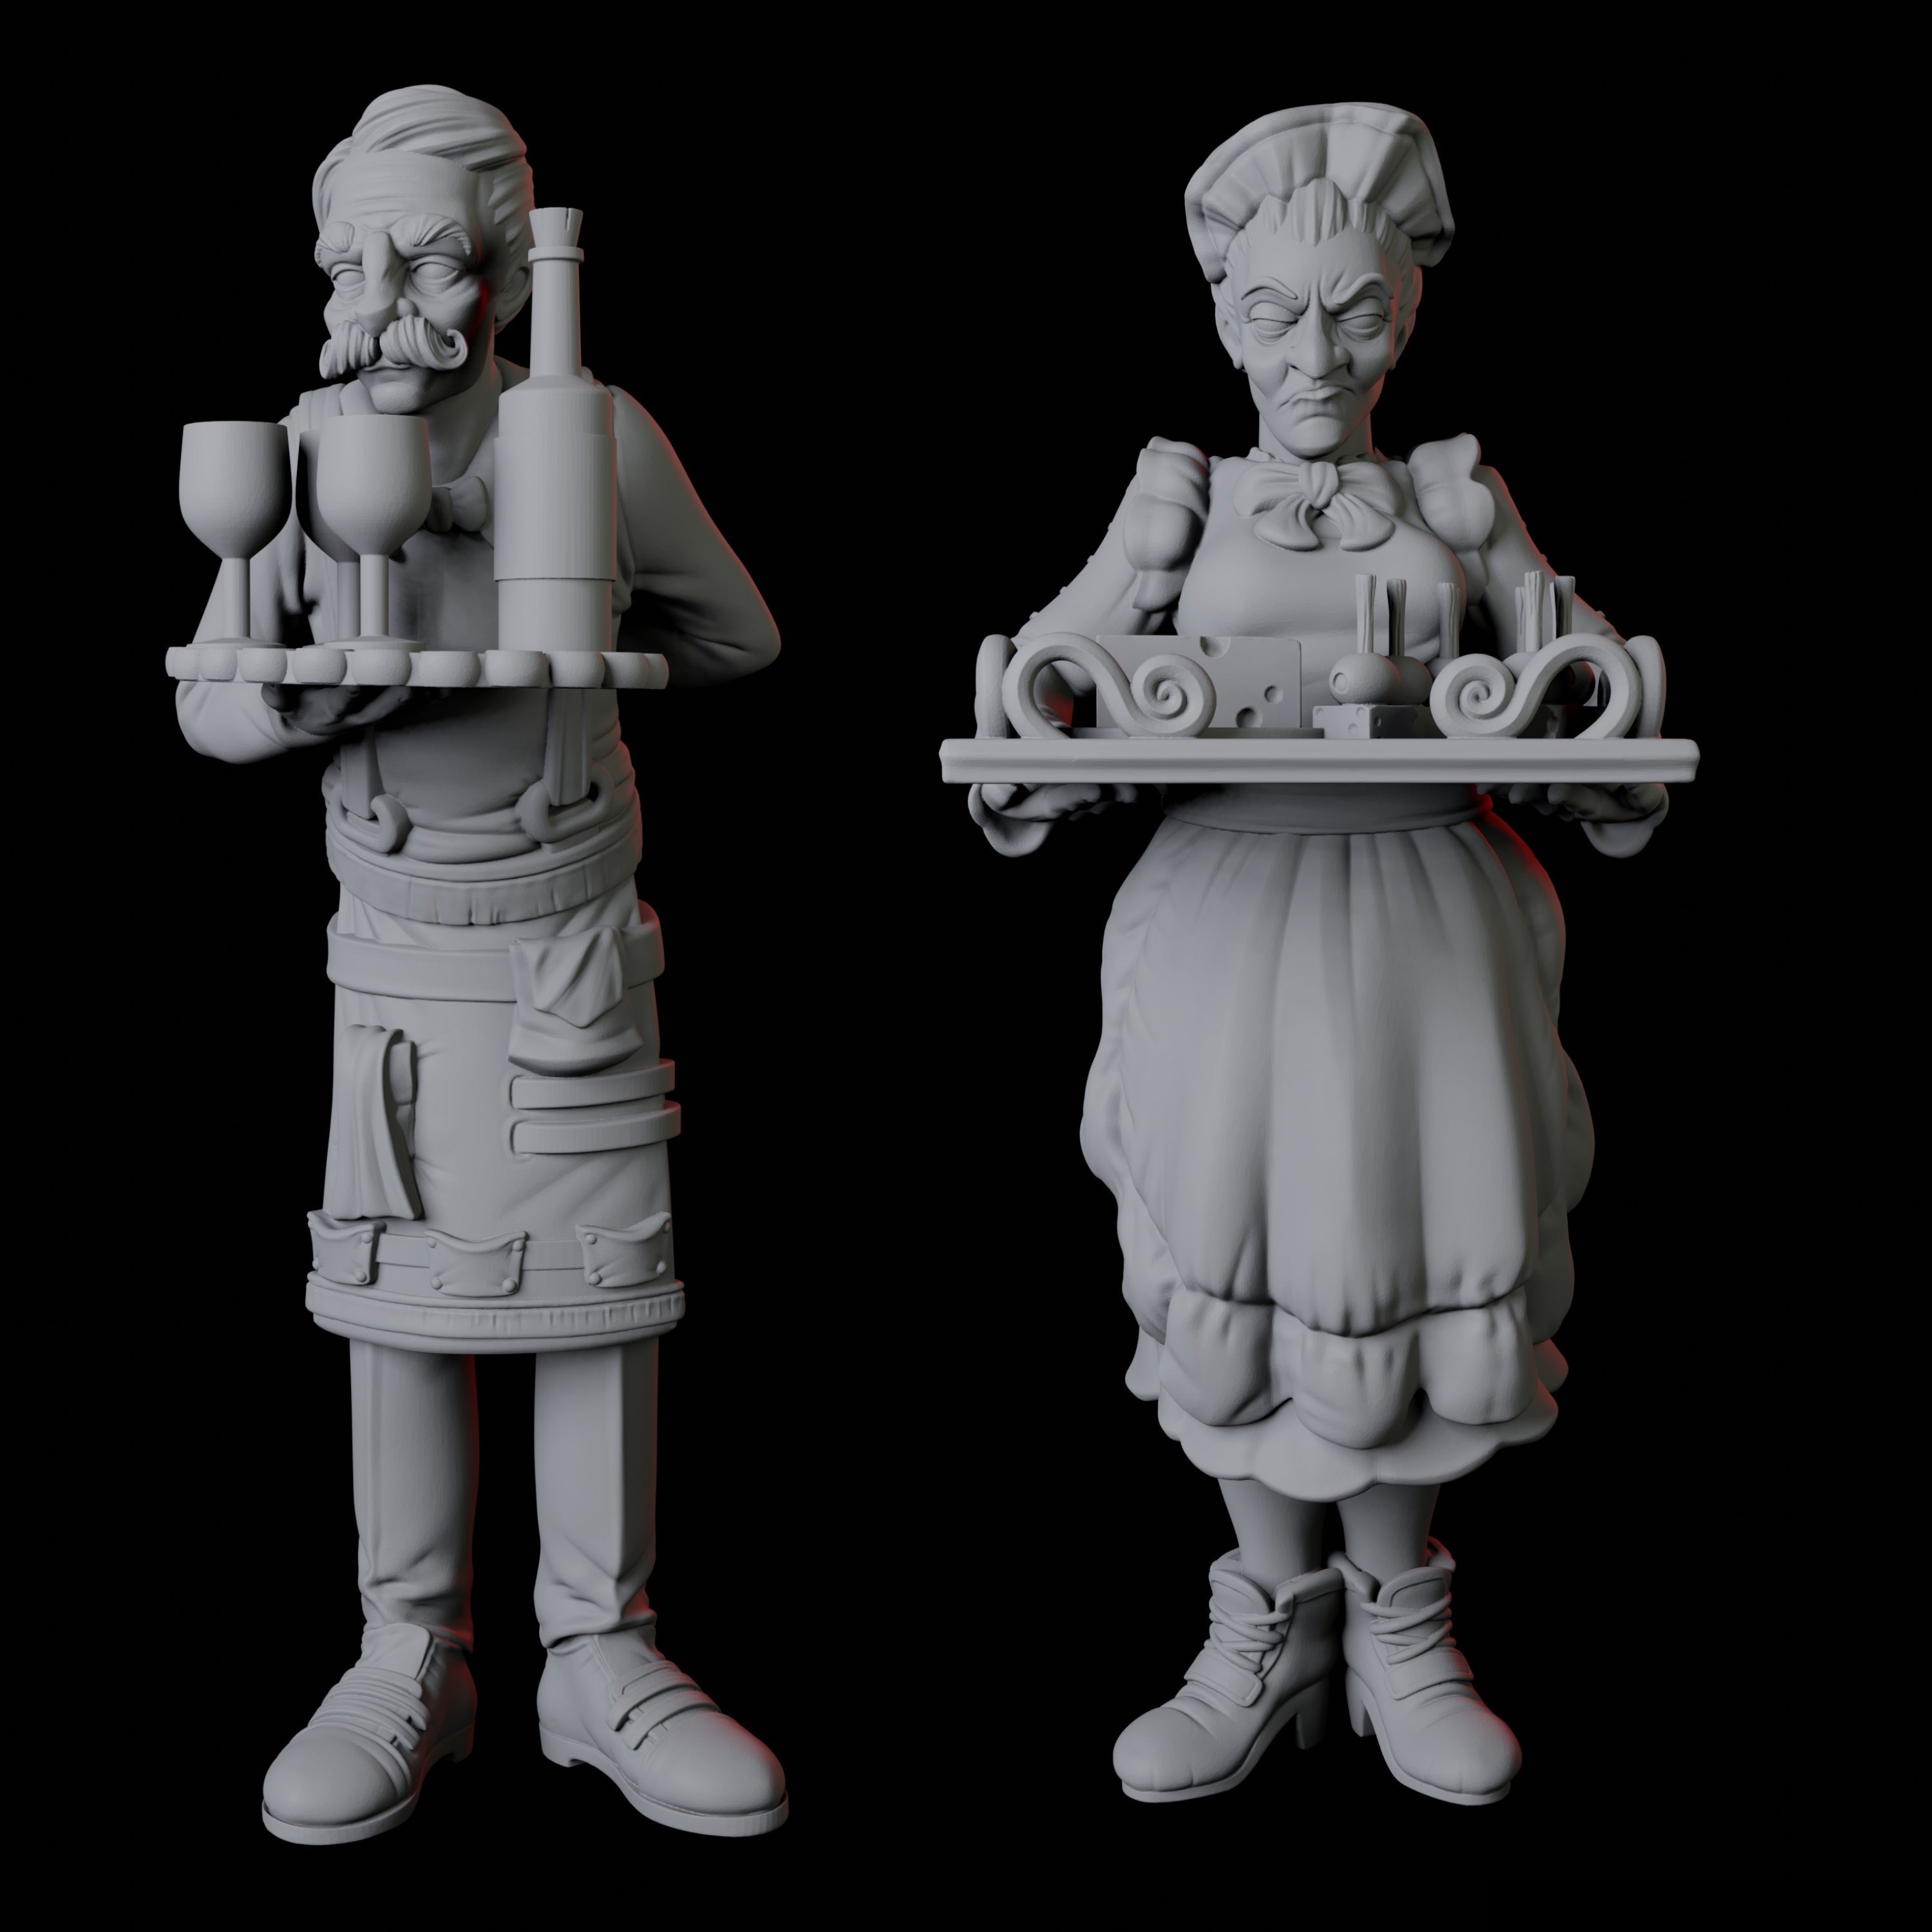 Two Royal Servants Miniature for Dungeons and Dragons